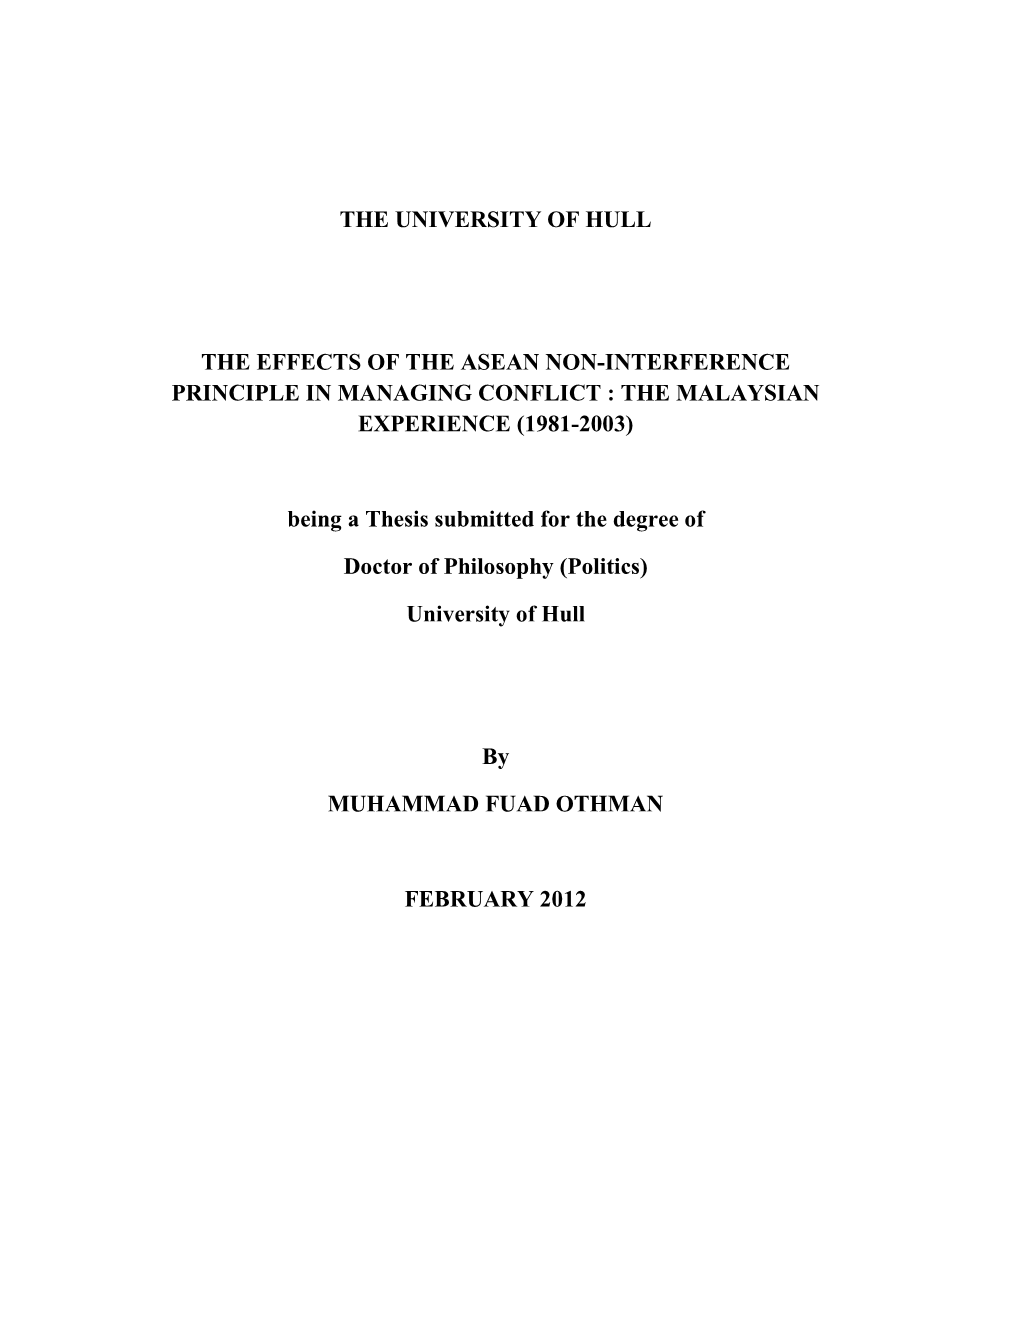 The University of Hull the Effects of the Asean Non